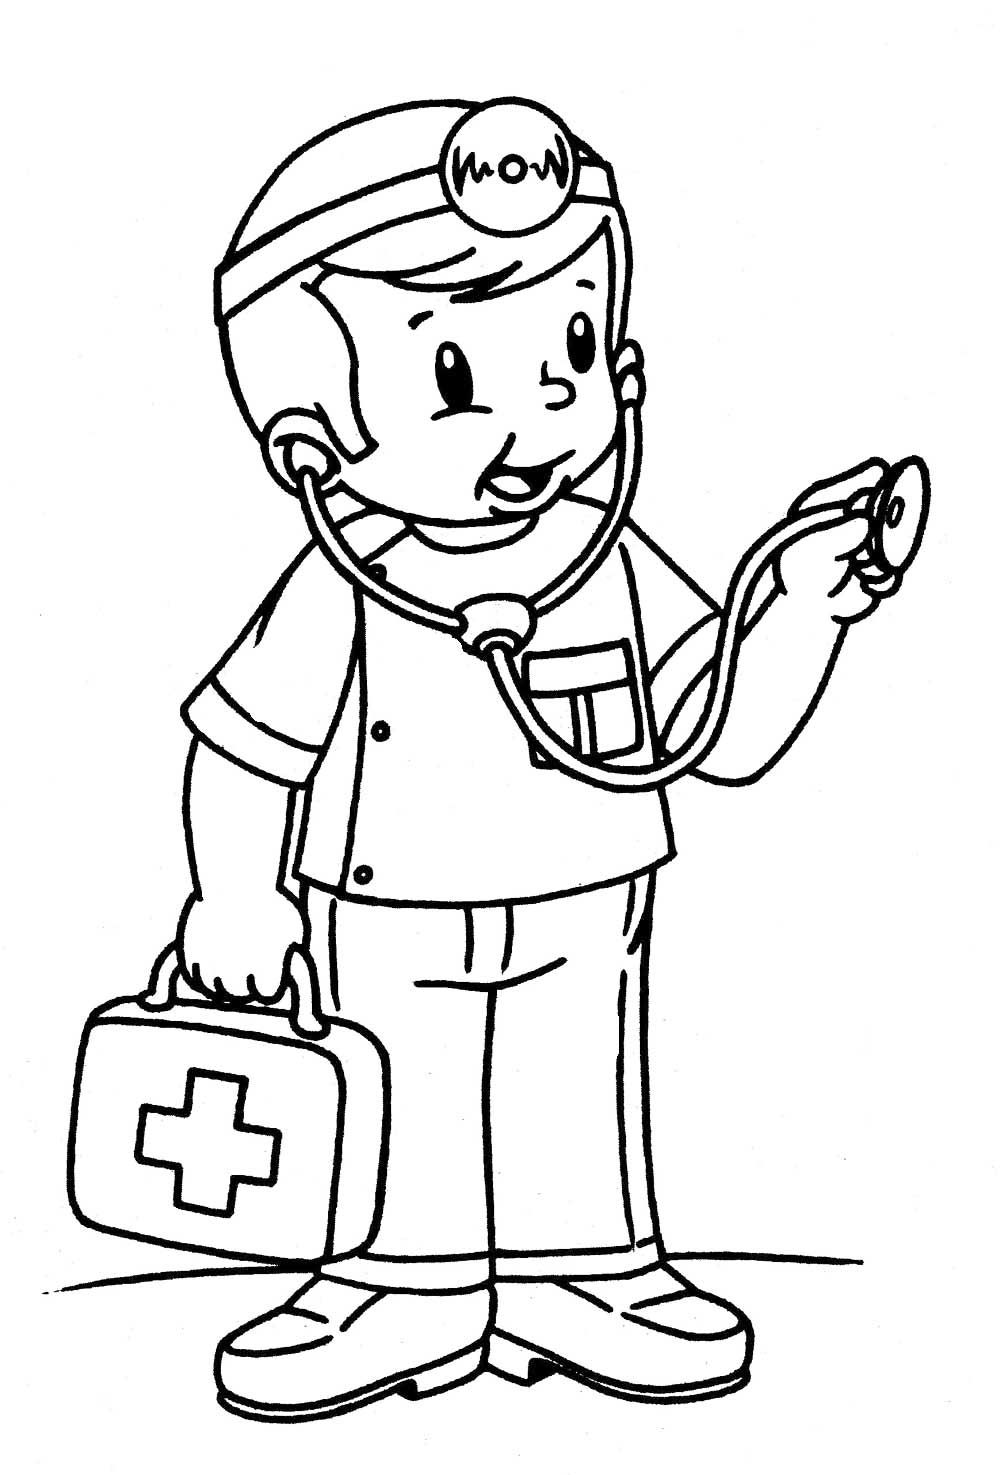 Doctor and Nurse Coloring Page - Free Printable Coloring Pages for Kids